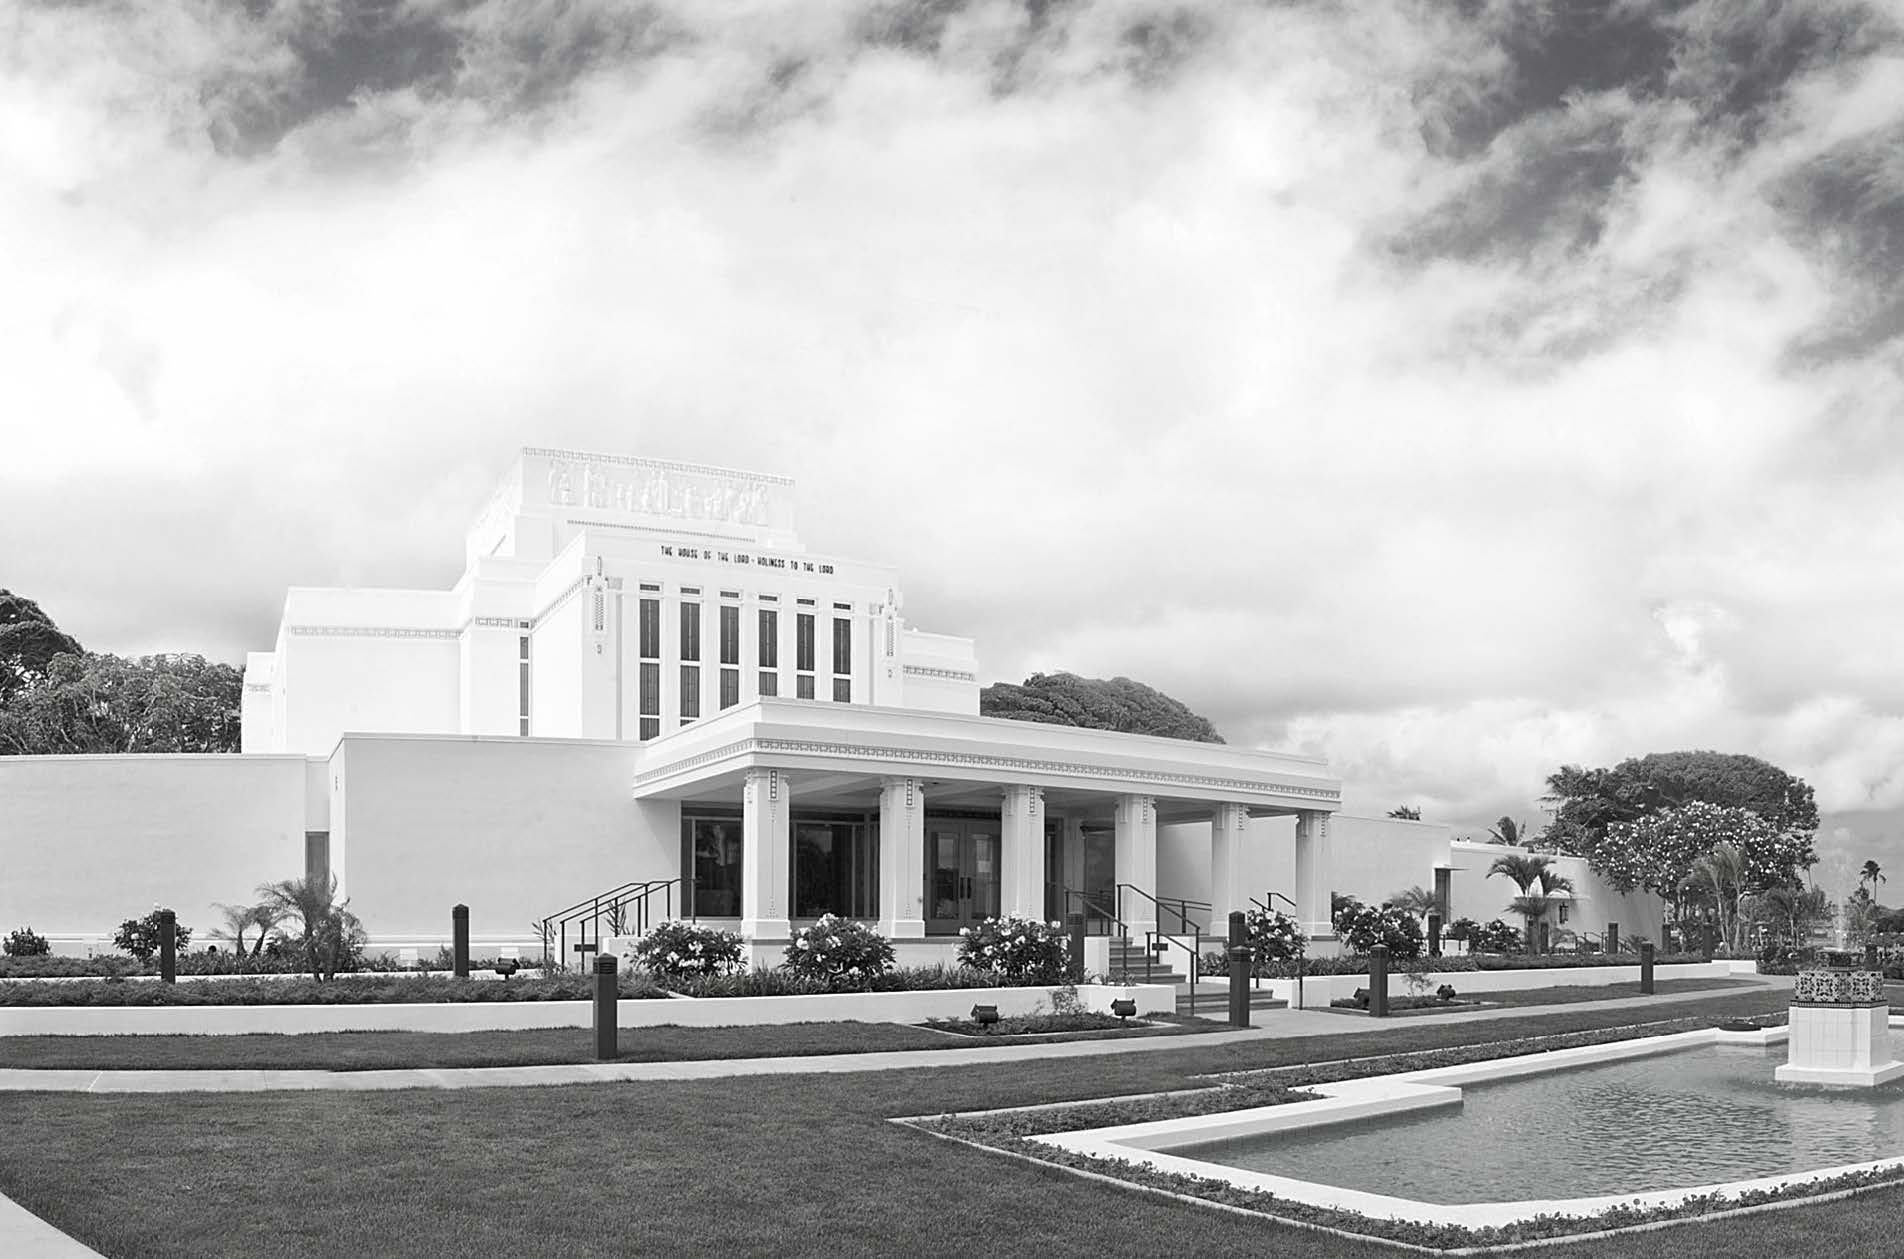 The reasoning for small temples shared by President Gordon B. Hinckley in 1998 mirrored the reasoning and minimalist design presented over eighty years earlier by President Joseph F. Smith